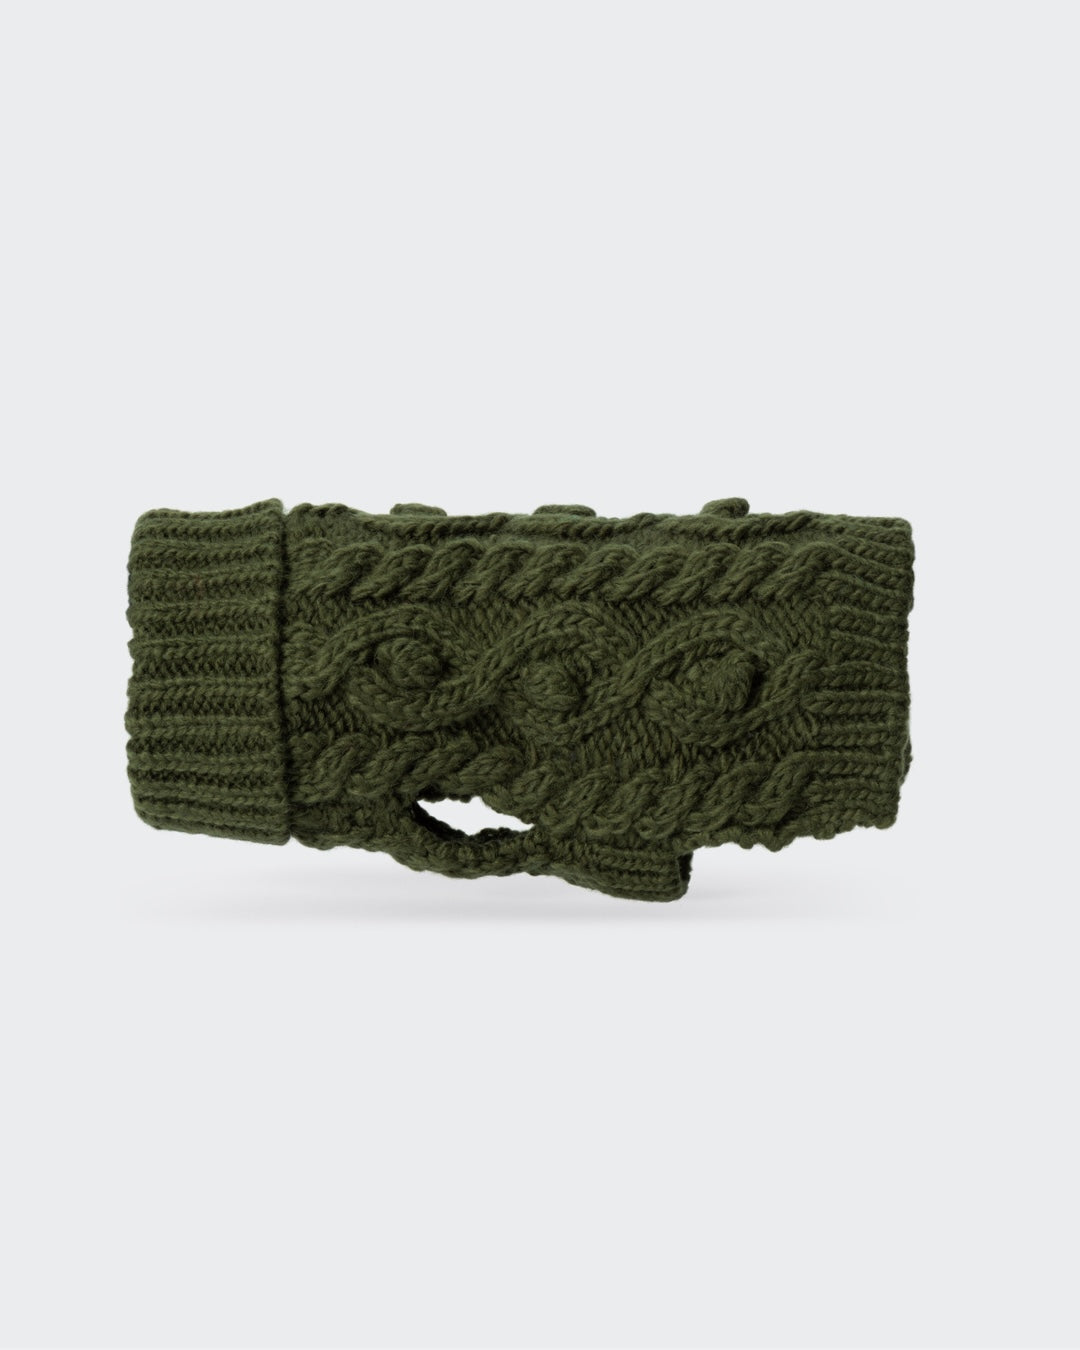 Handmade Knit Sweater Green for Dogs